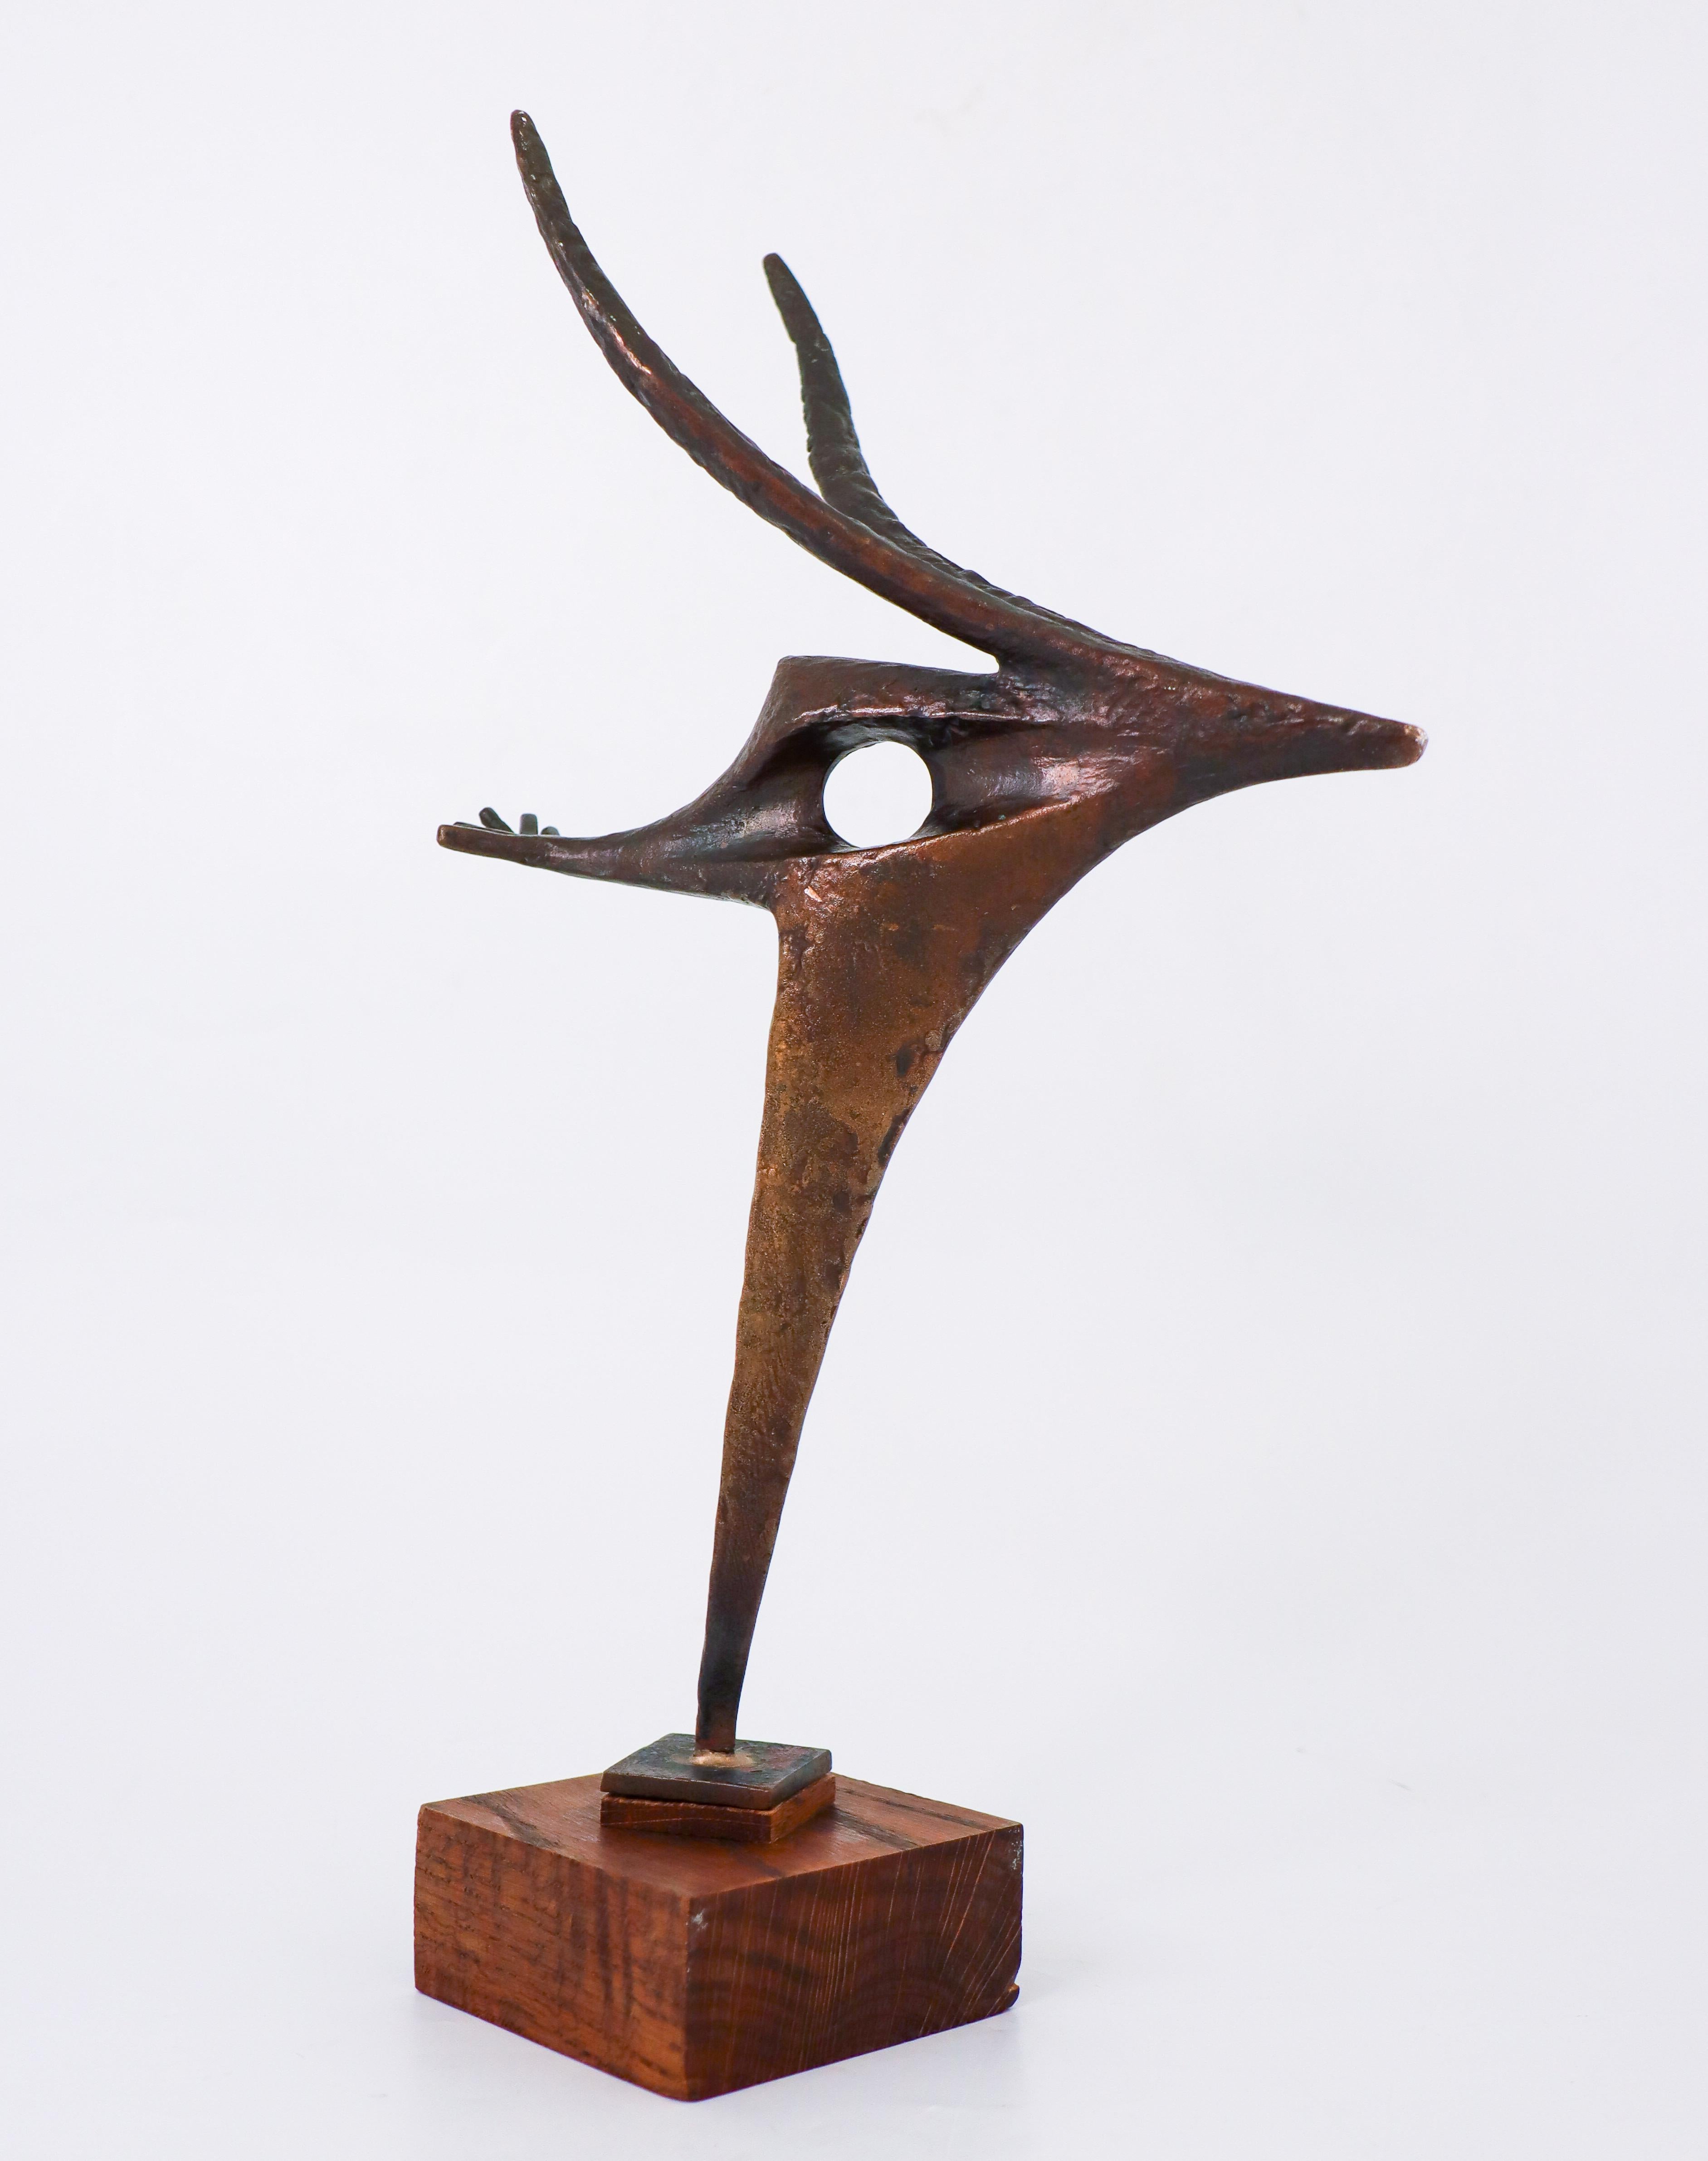 A lovely Bronze sculpture by the Swedish artist Bengt Amundin designed in 1957. The sculpture is called 